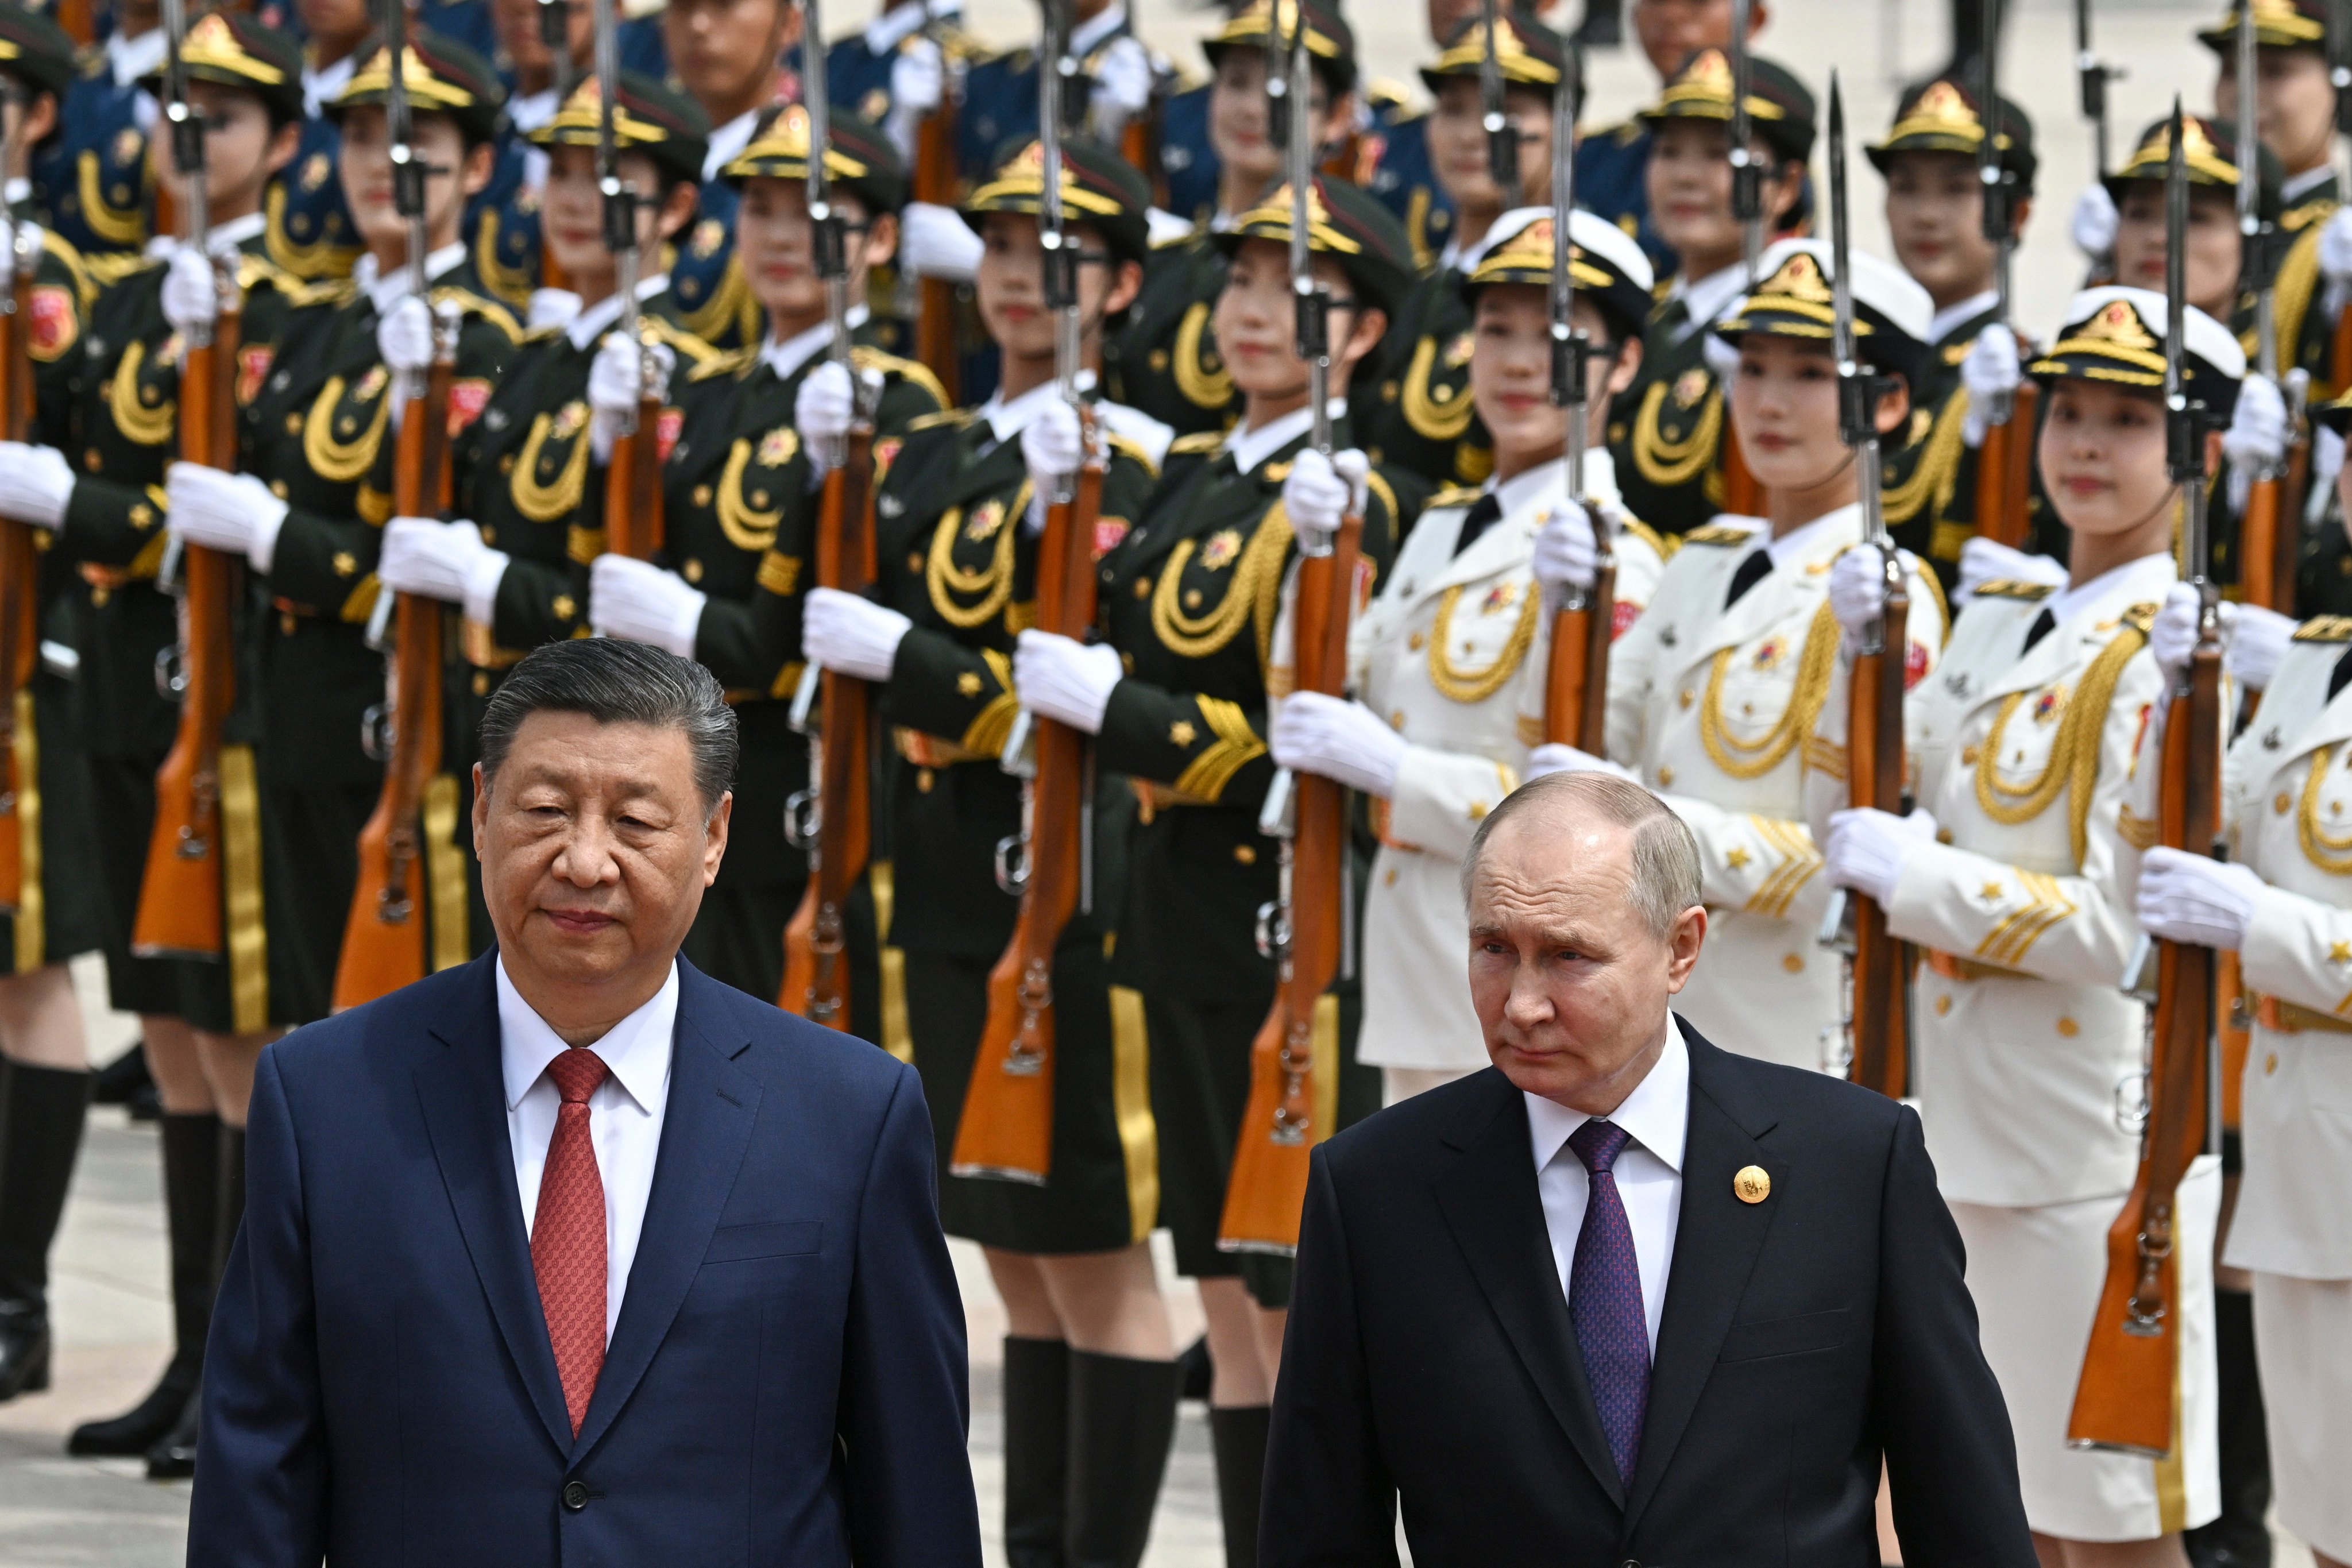 Chinese President Xi Jinping and Russian leader Vladimir Putin review an honour guard at a welcome ceremony in Beijing on Thursday. Photo: Pool via AP